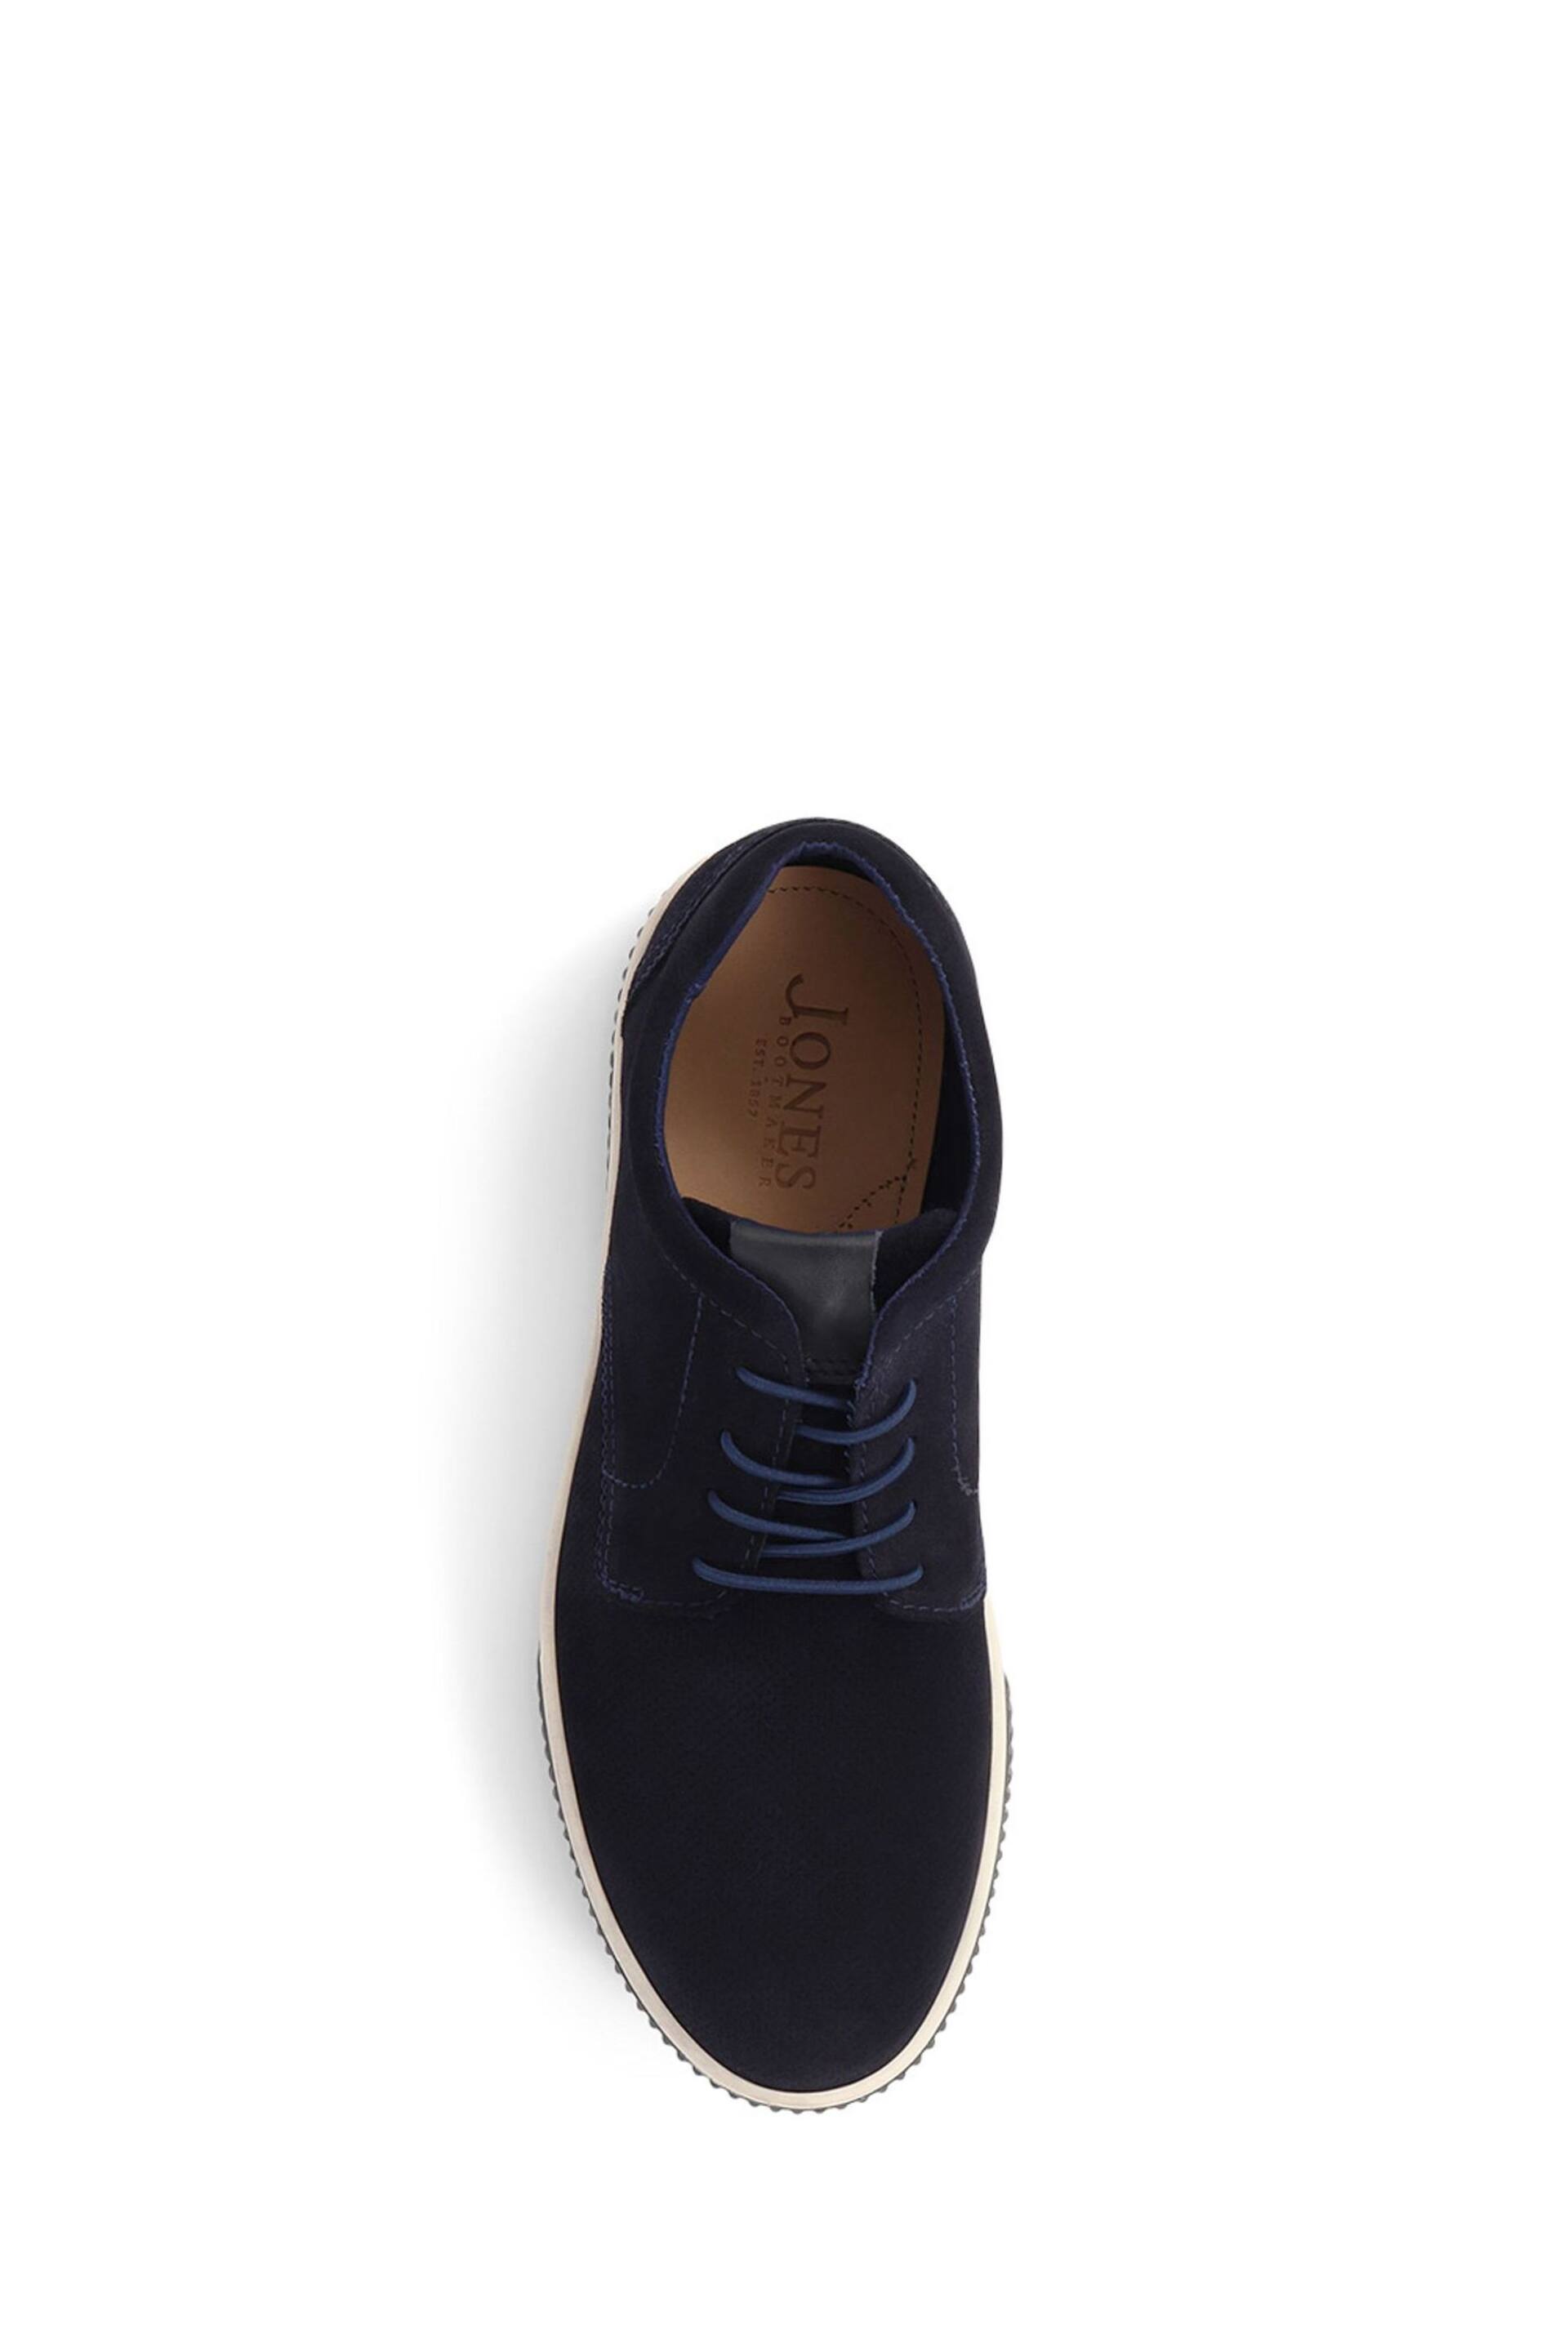 Jones Bootmaker Blue Seaford Suede Trainers - Image 6 of 6